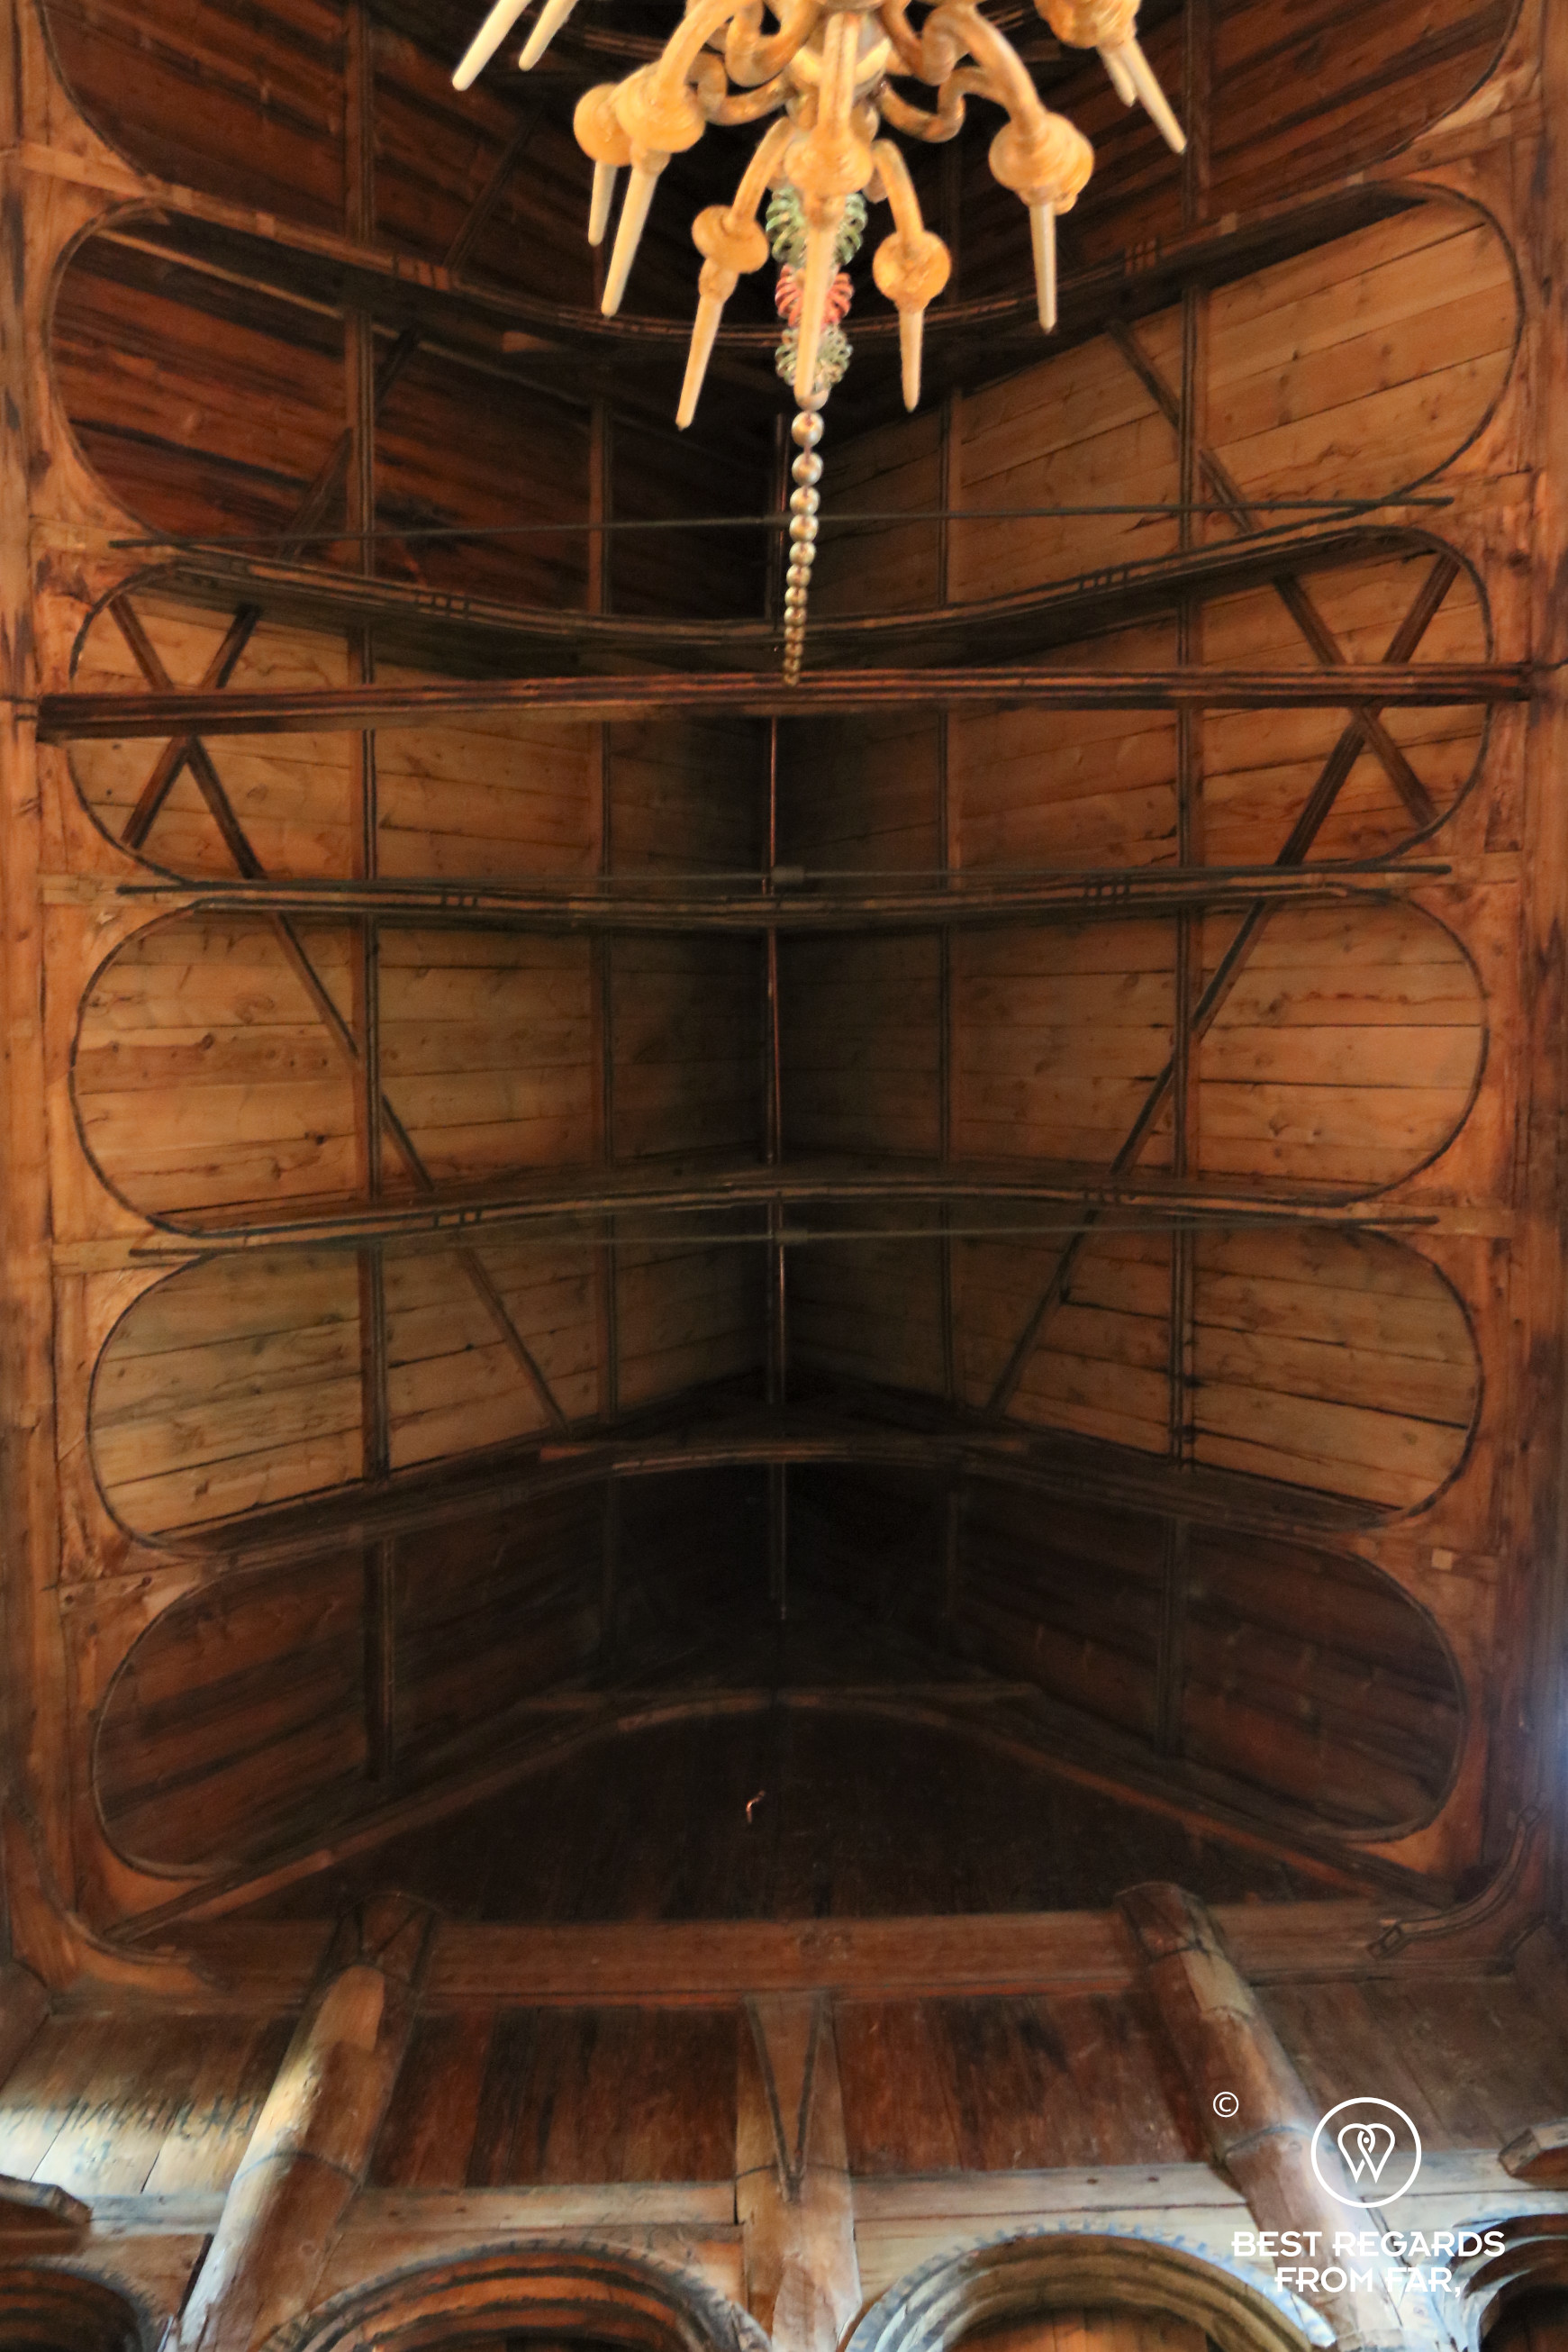 The ceiling of Lom Stave Church